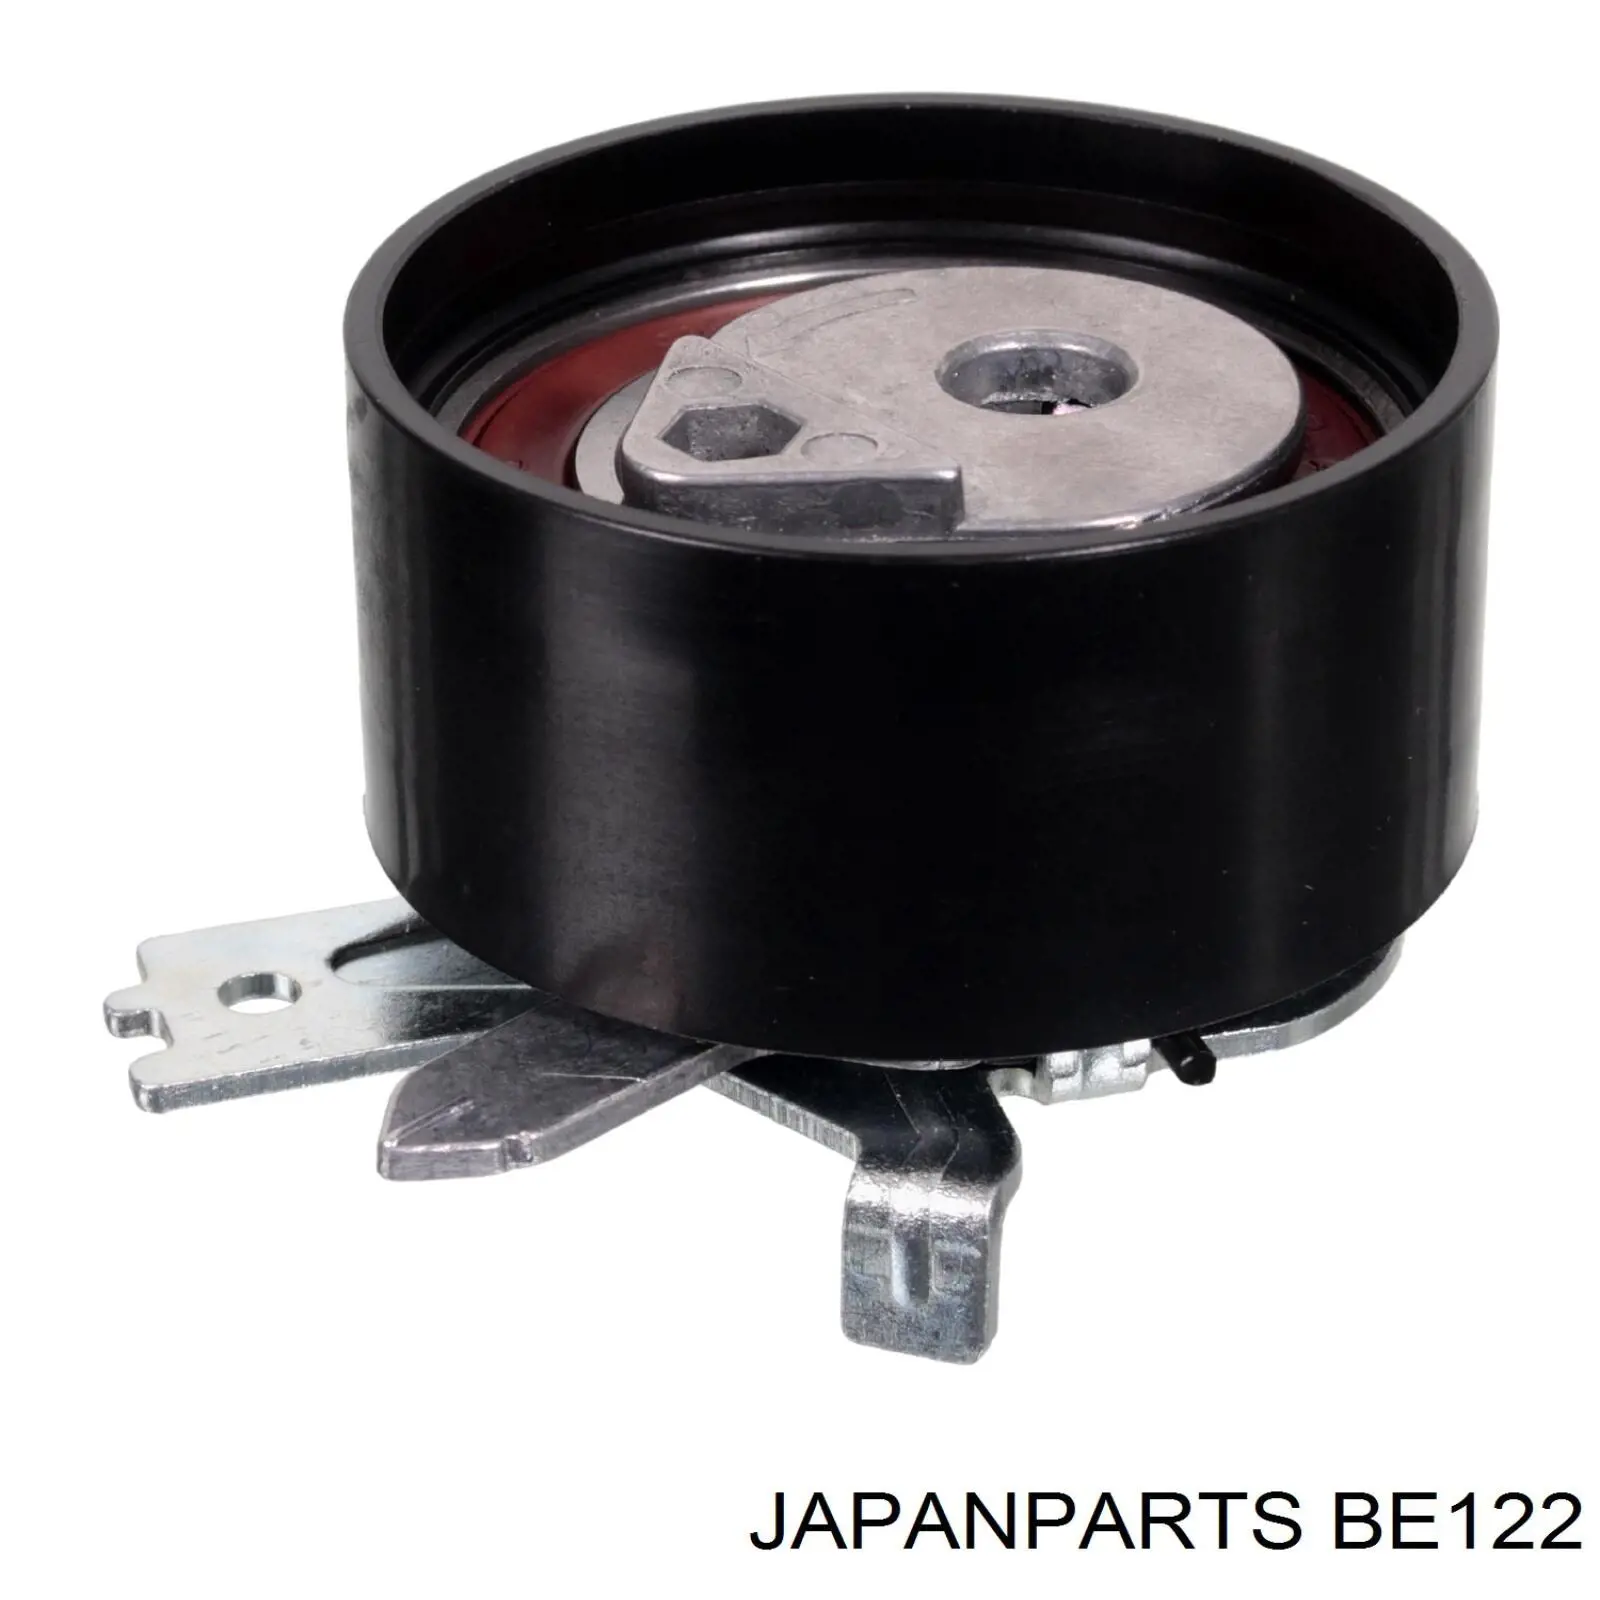 BE122 Japan Parts ролик грм